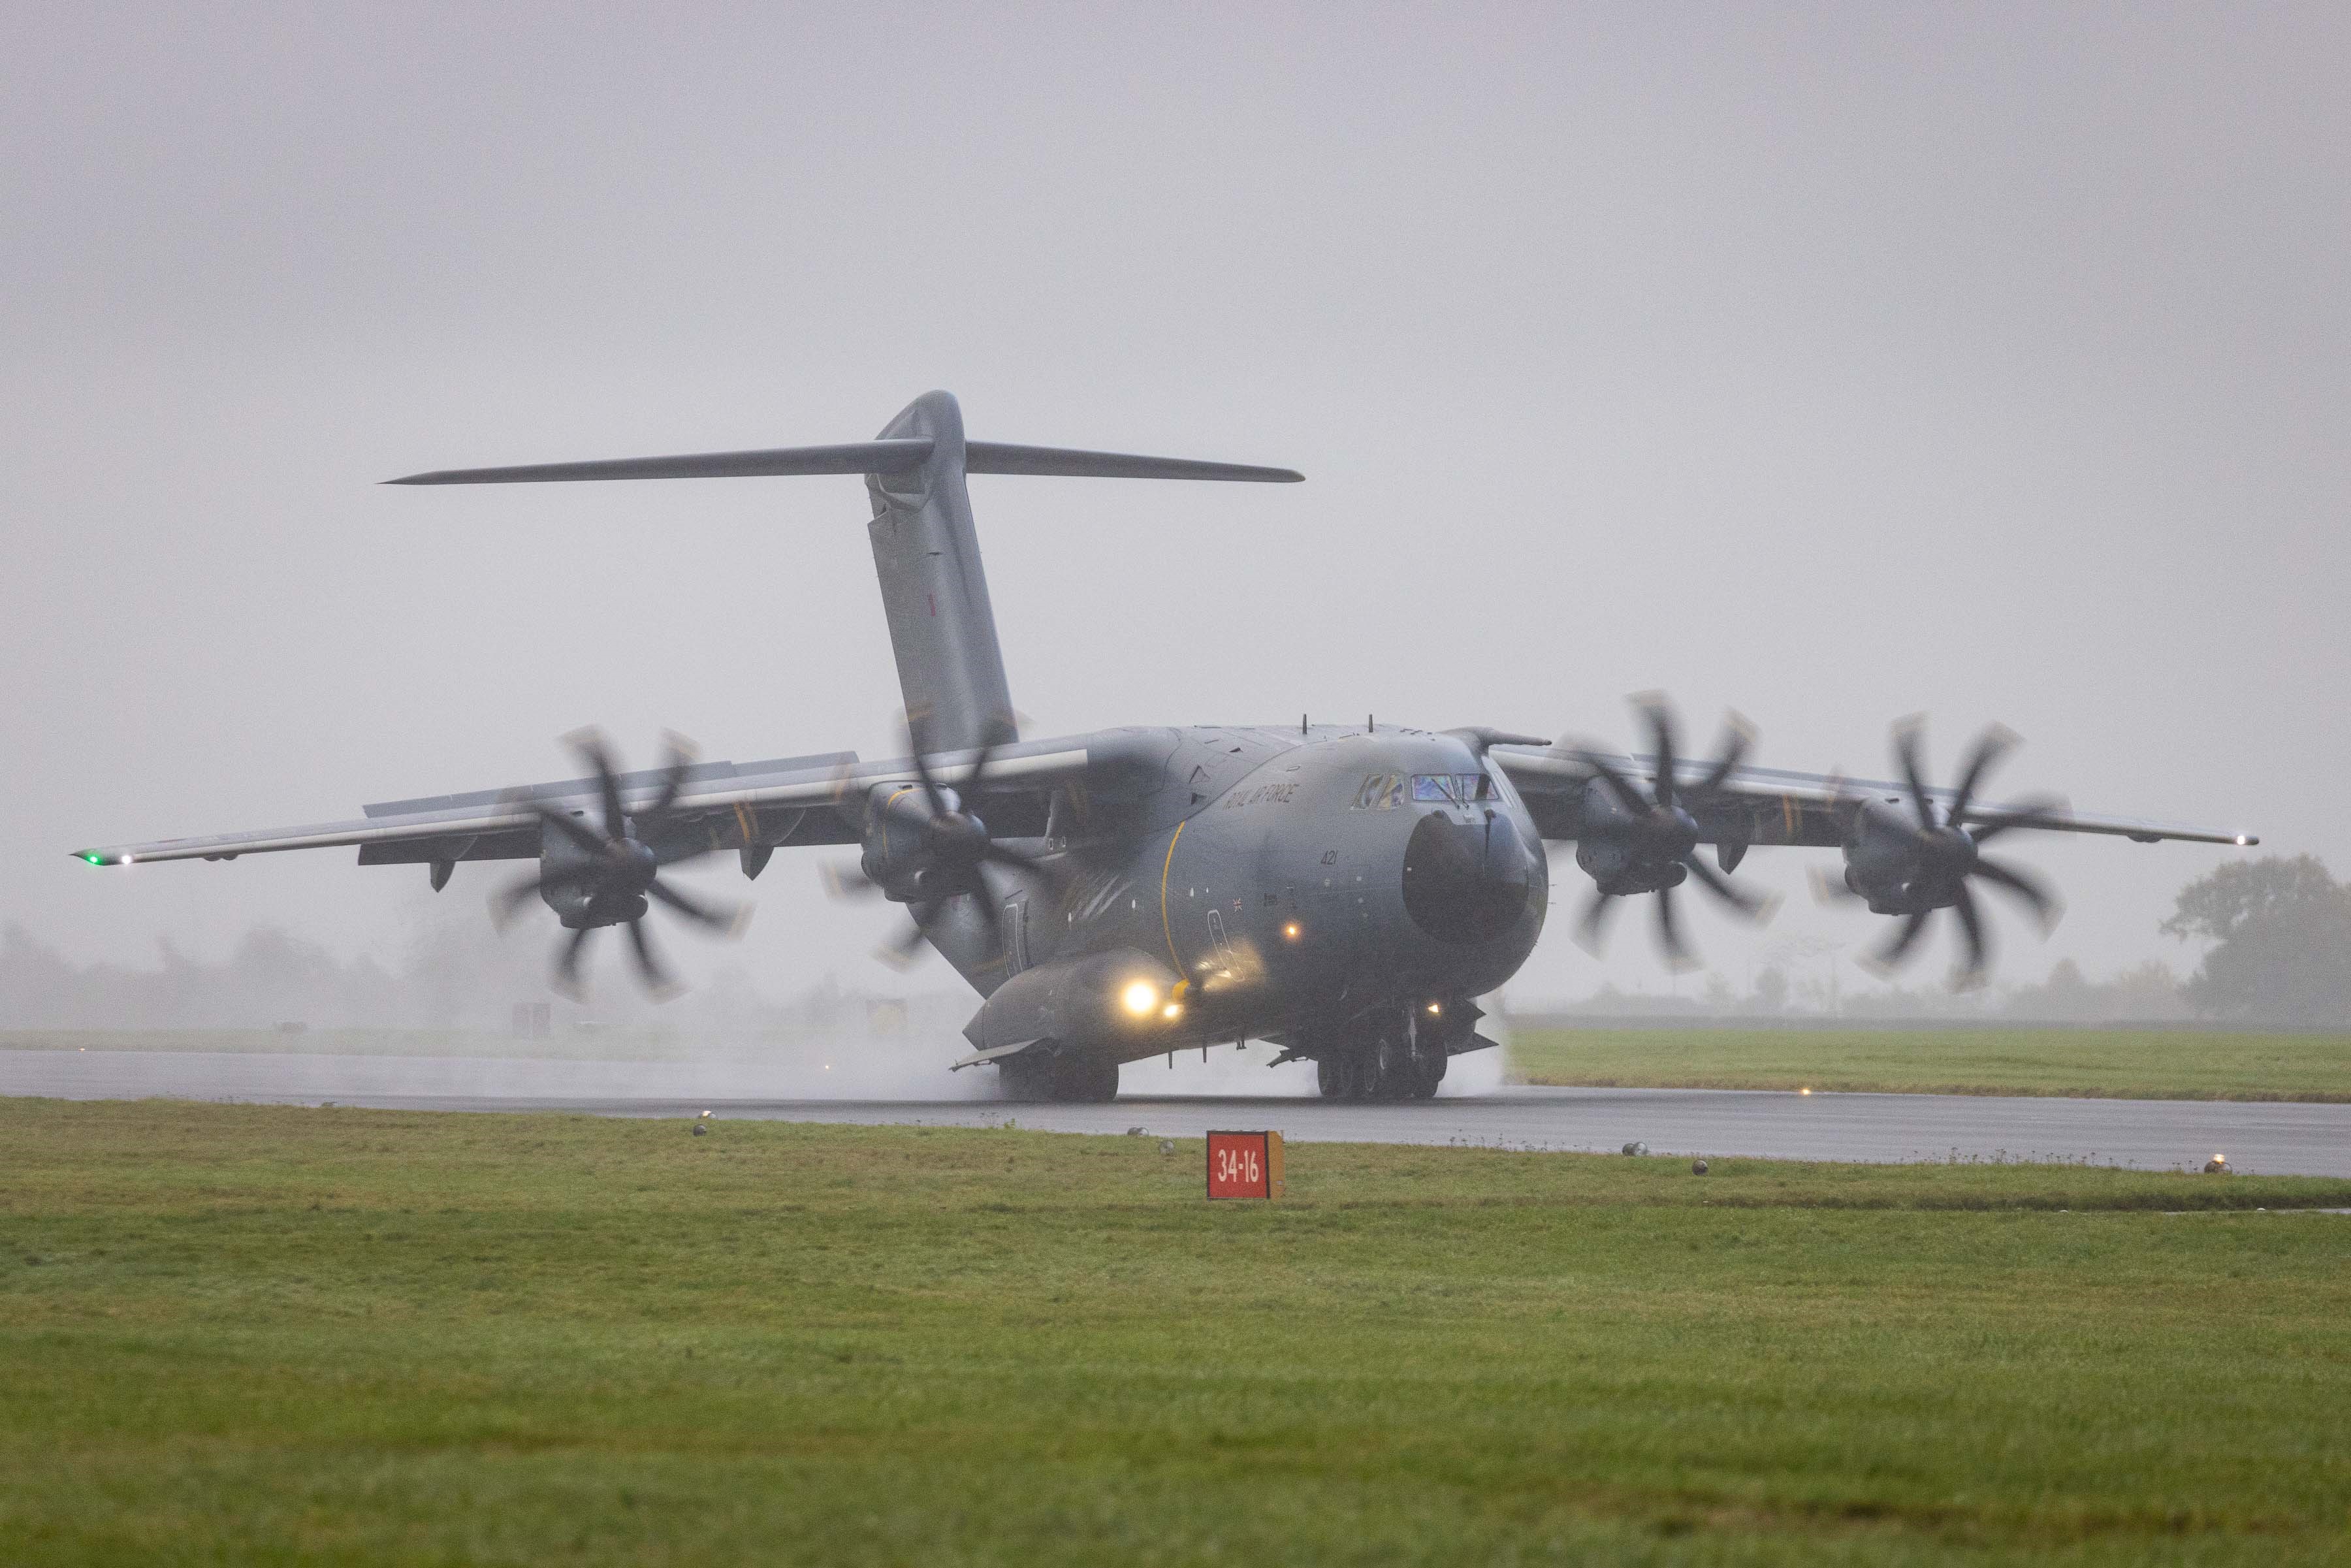 Photo - An Atlas aircraft on a wet runway, with plumes of spray in its wake